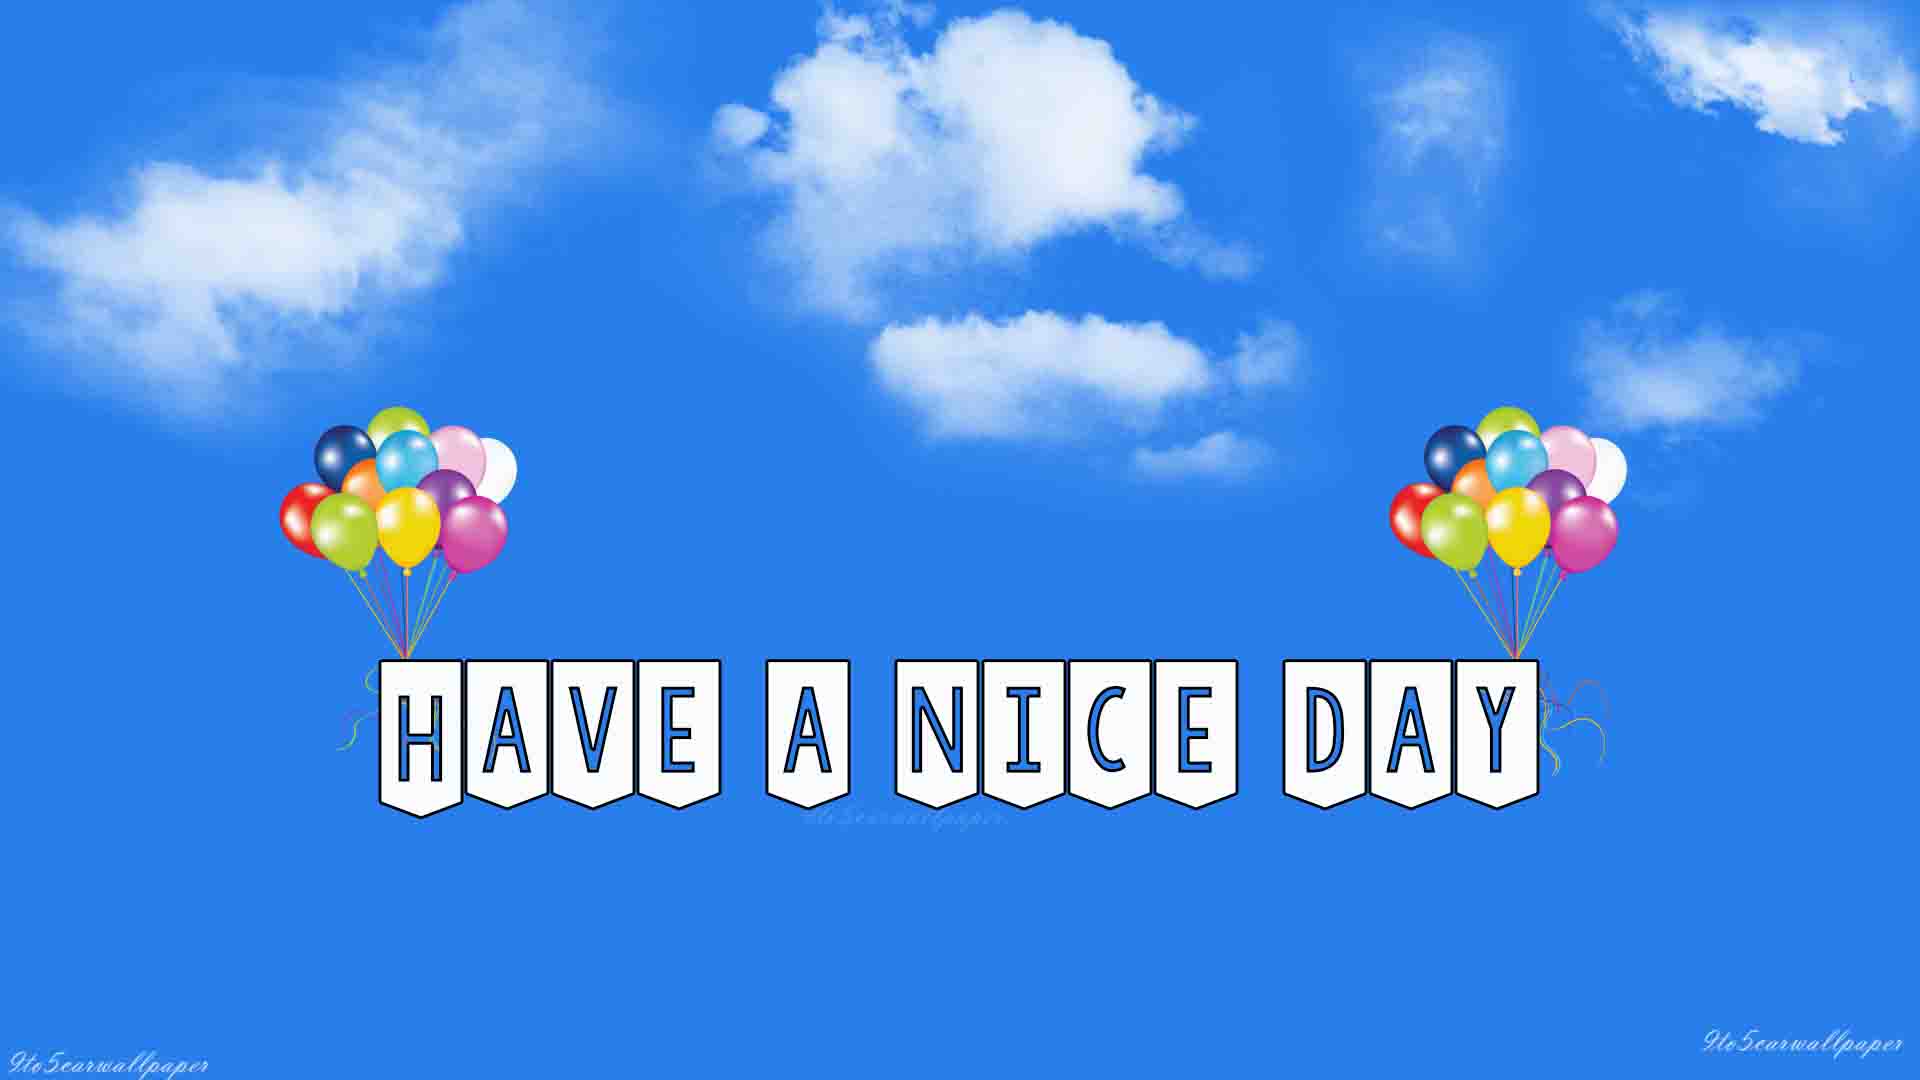 have-a-nice-day-hd-wallpapers-2017.jpg